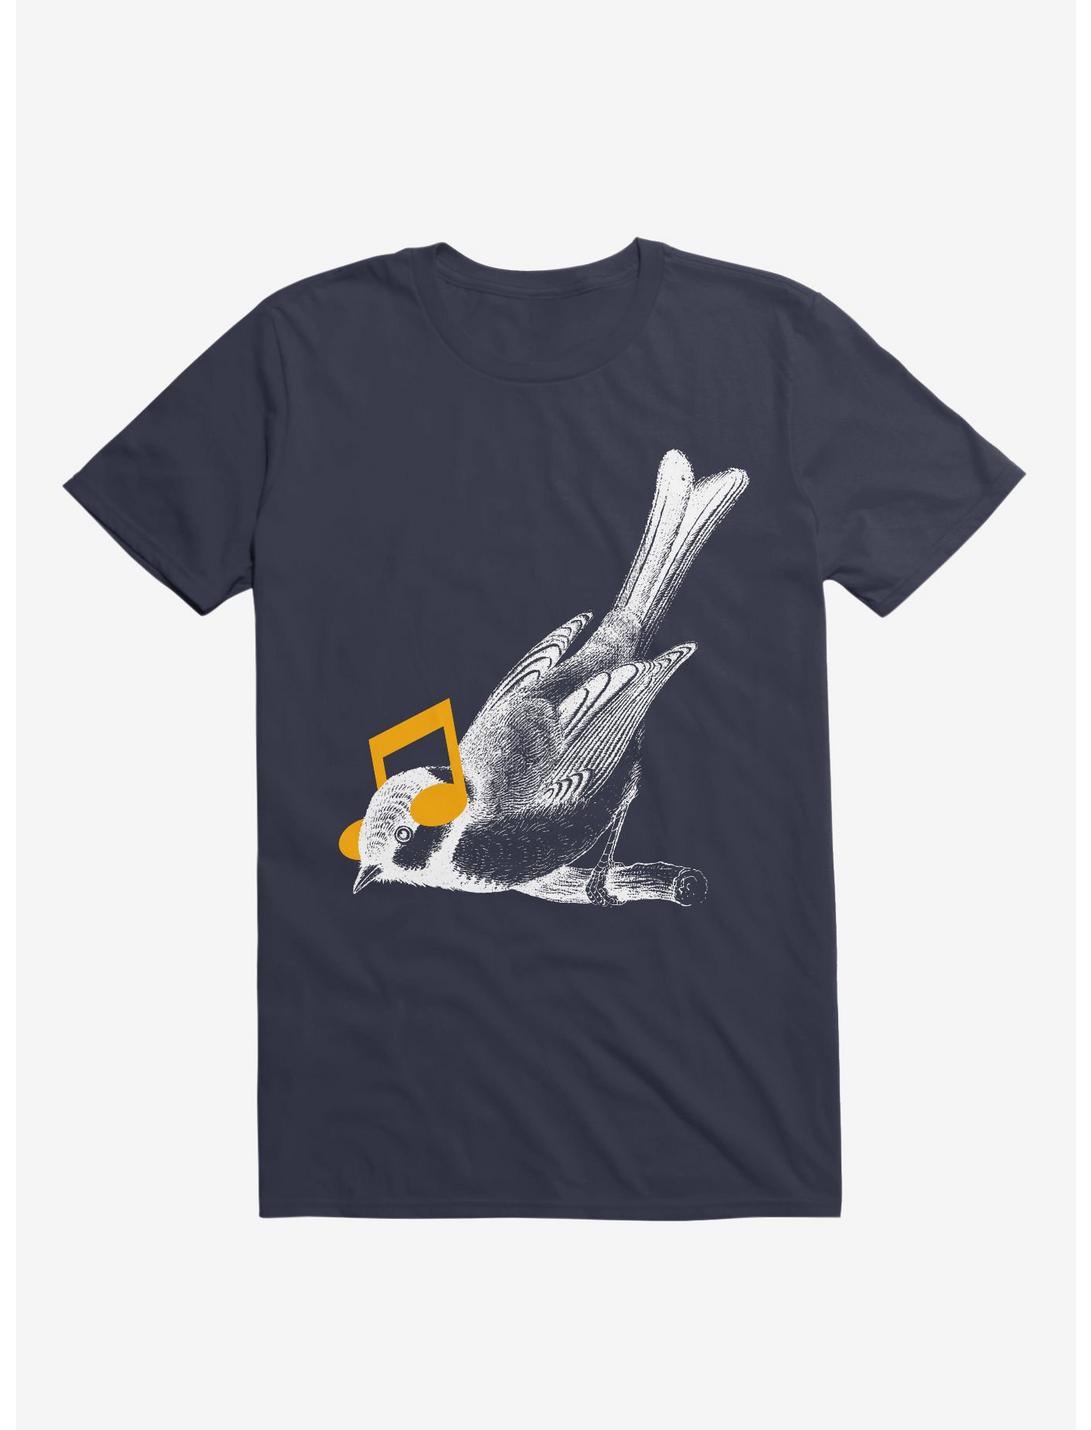 Listening To Your Heart T-Shirt, NAVY, hi-res